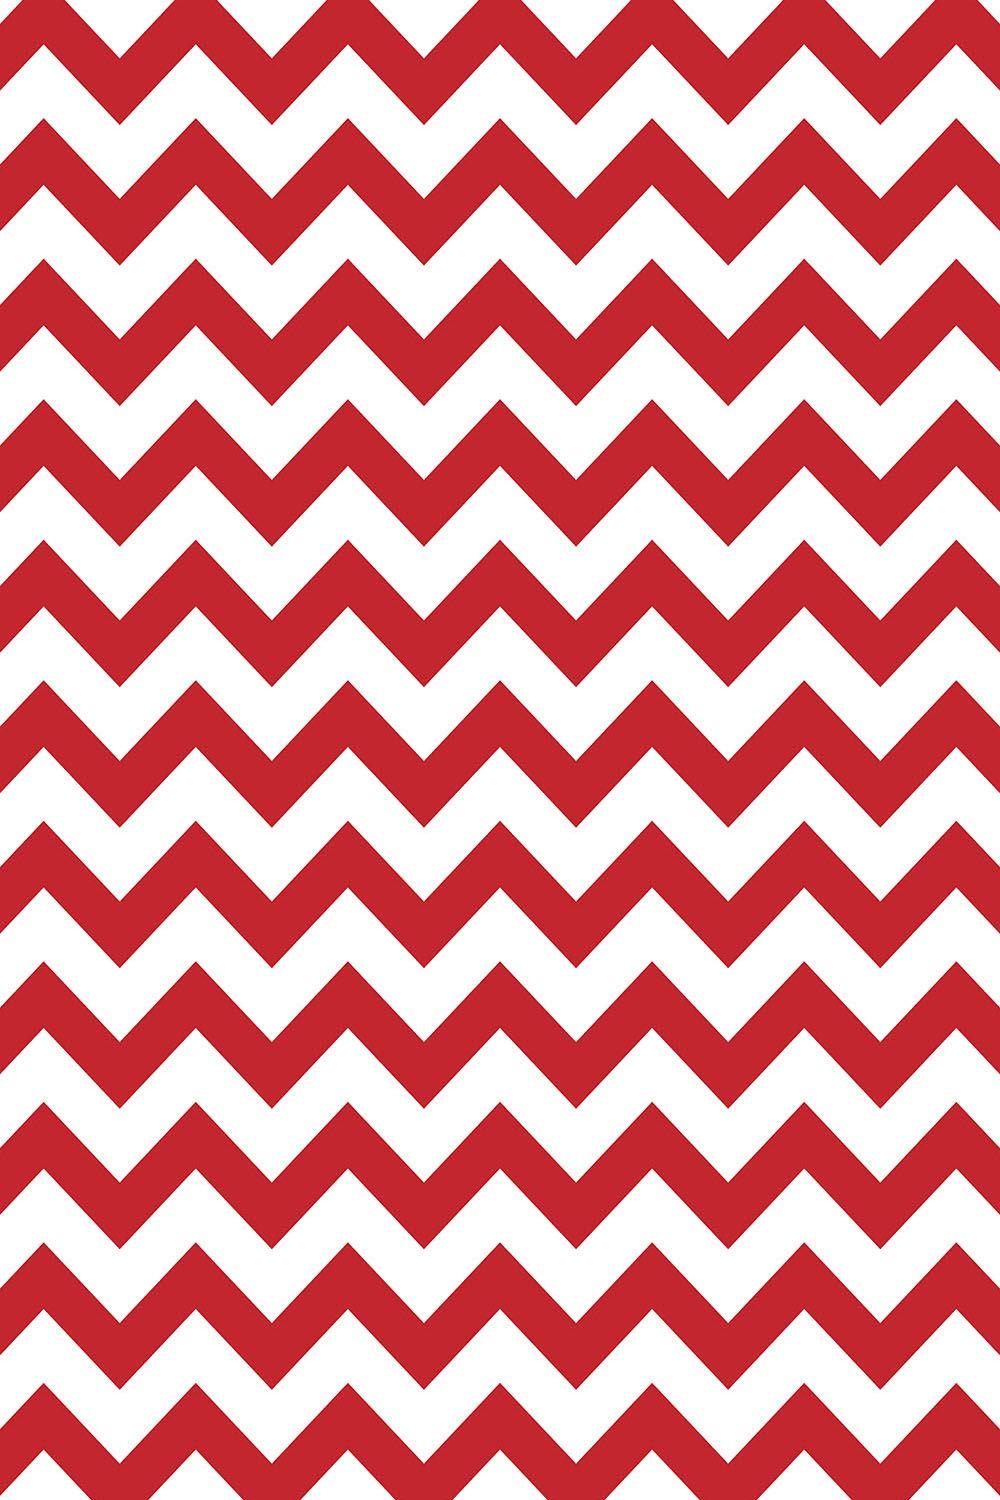 Red & White Chevron Printed Background Paper